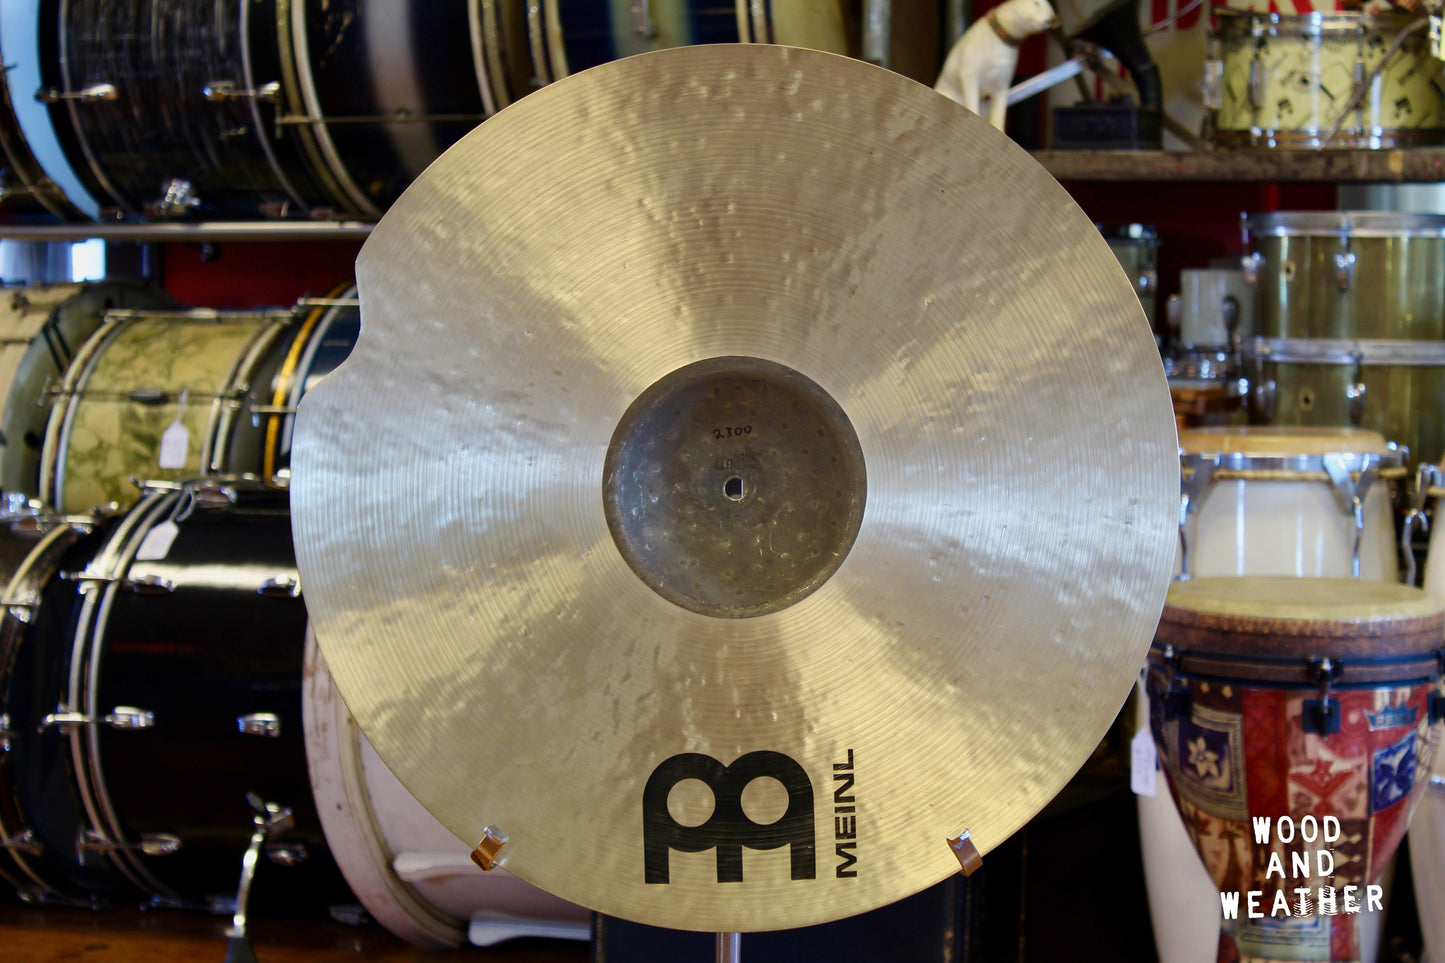 Used Meinl 21" Byzance Polyphonic Ride Cymbal 2300g